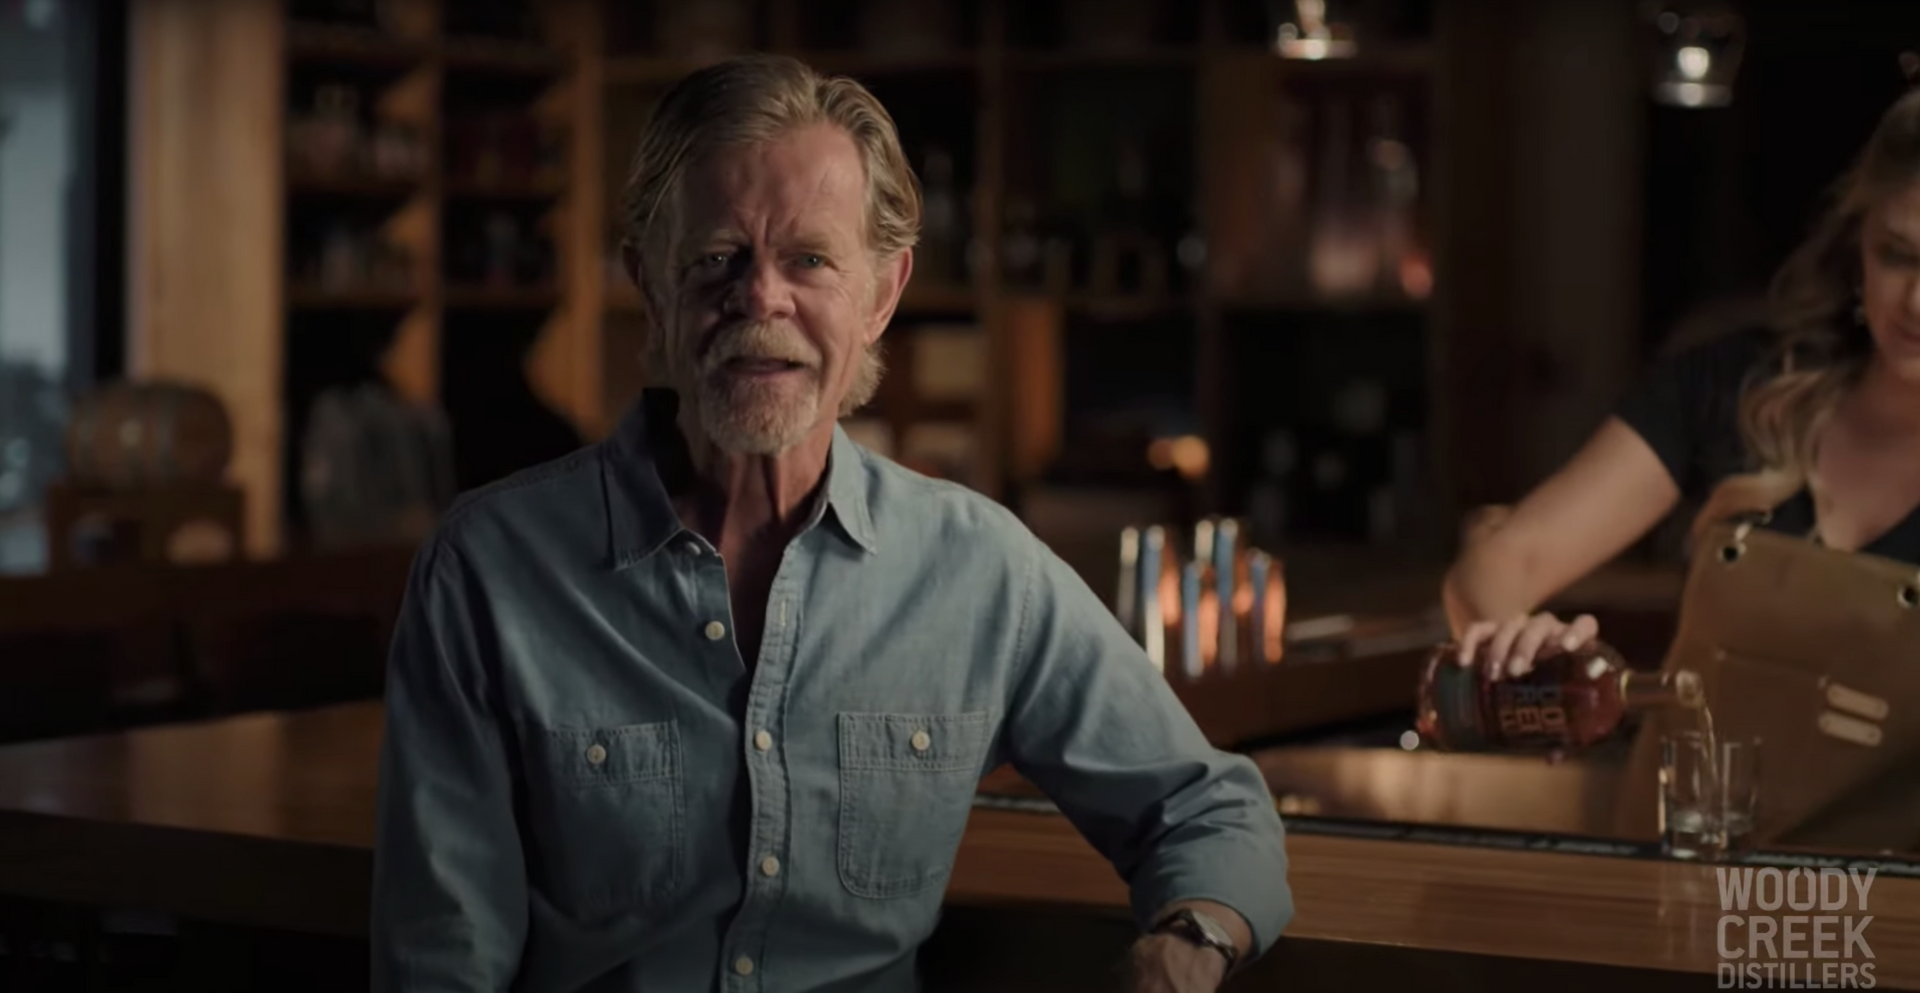 Load video: Woody Creek Distillers Tour with William H. Macy